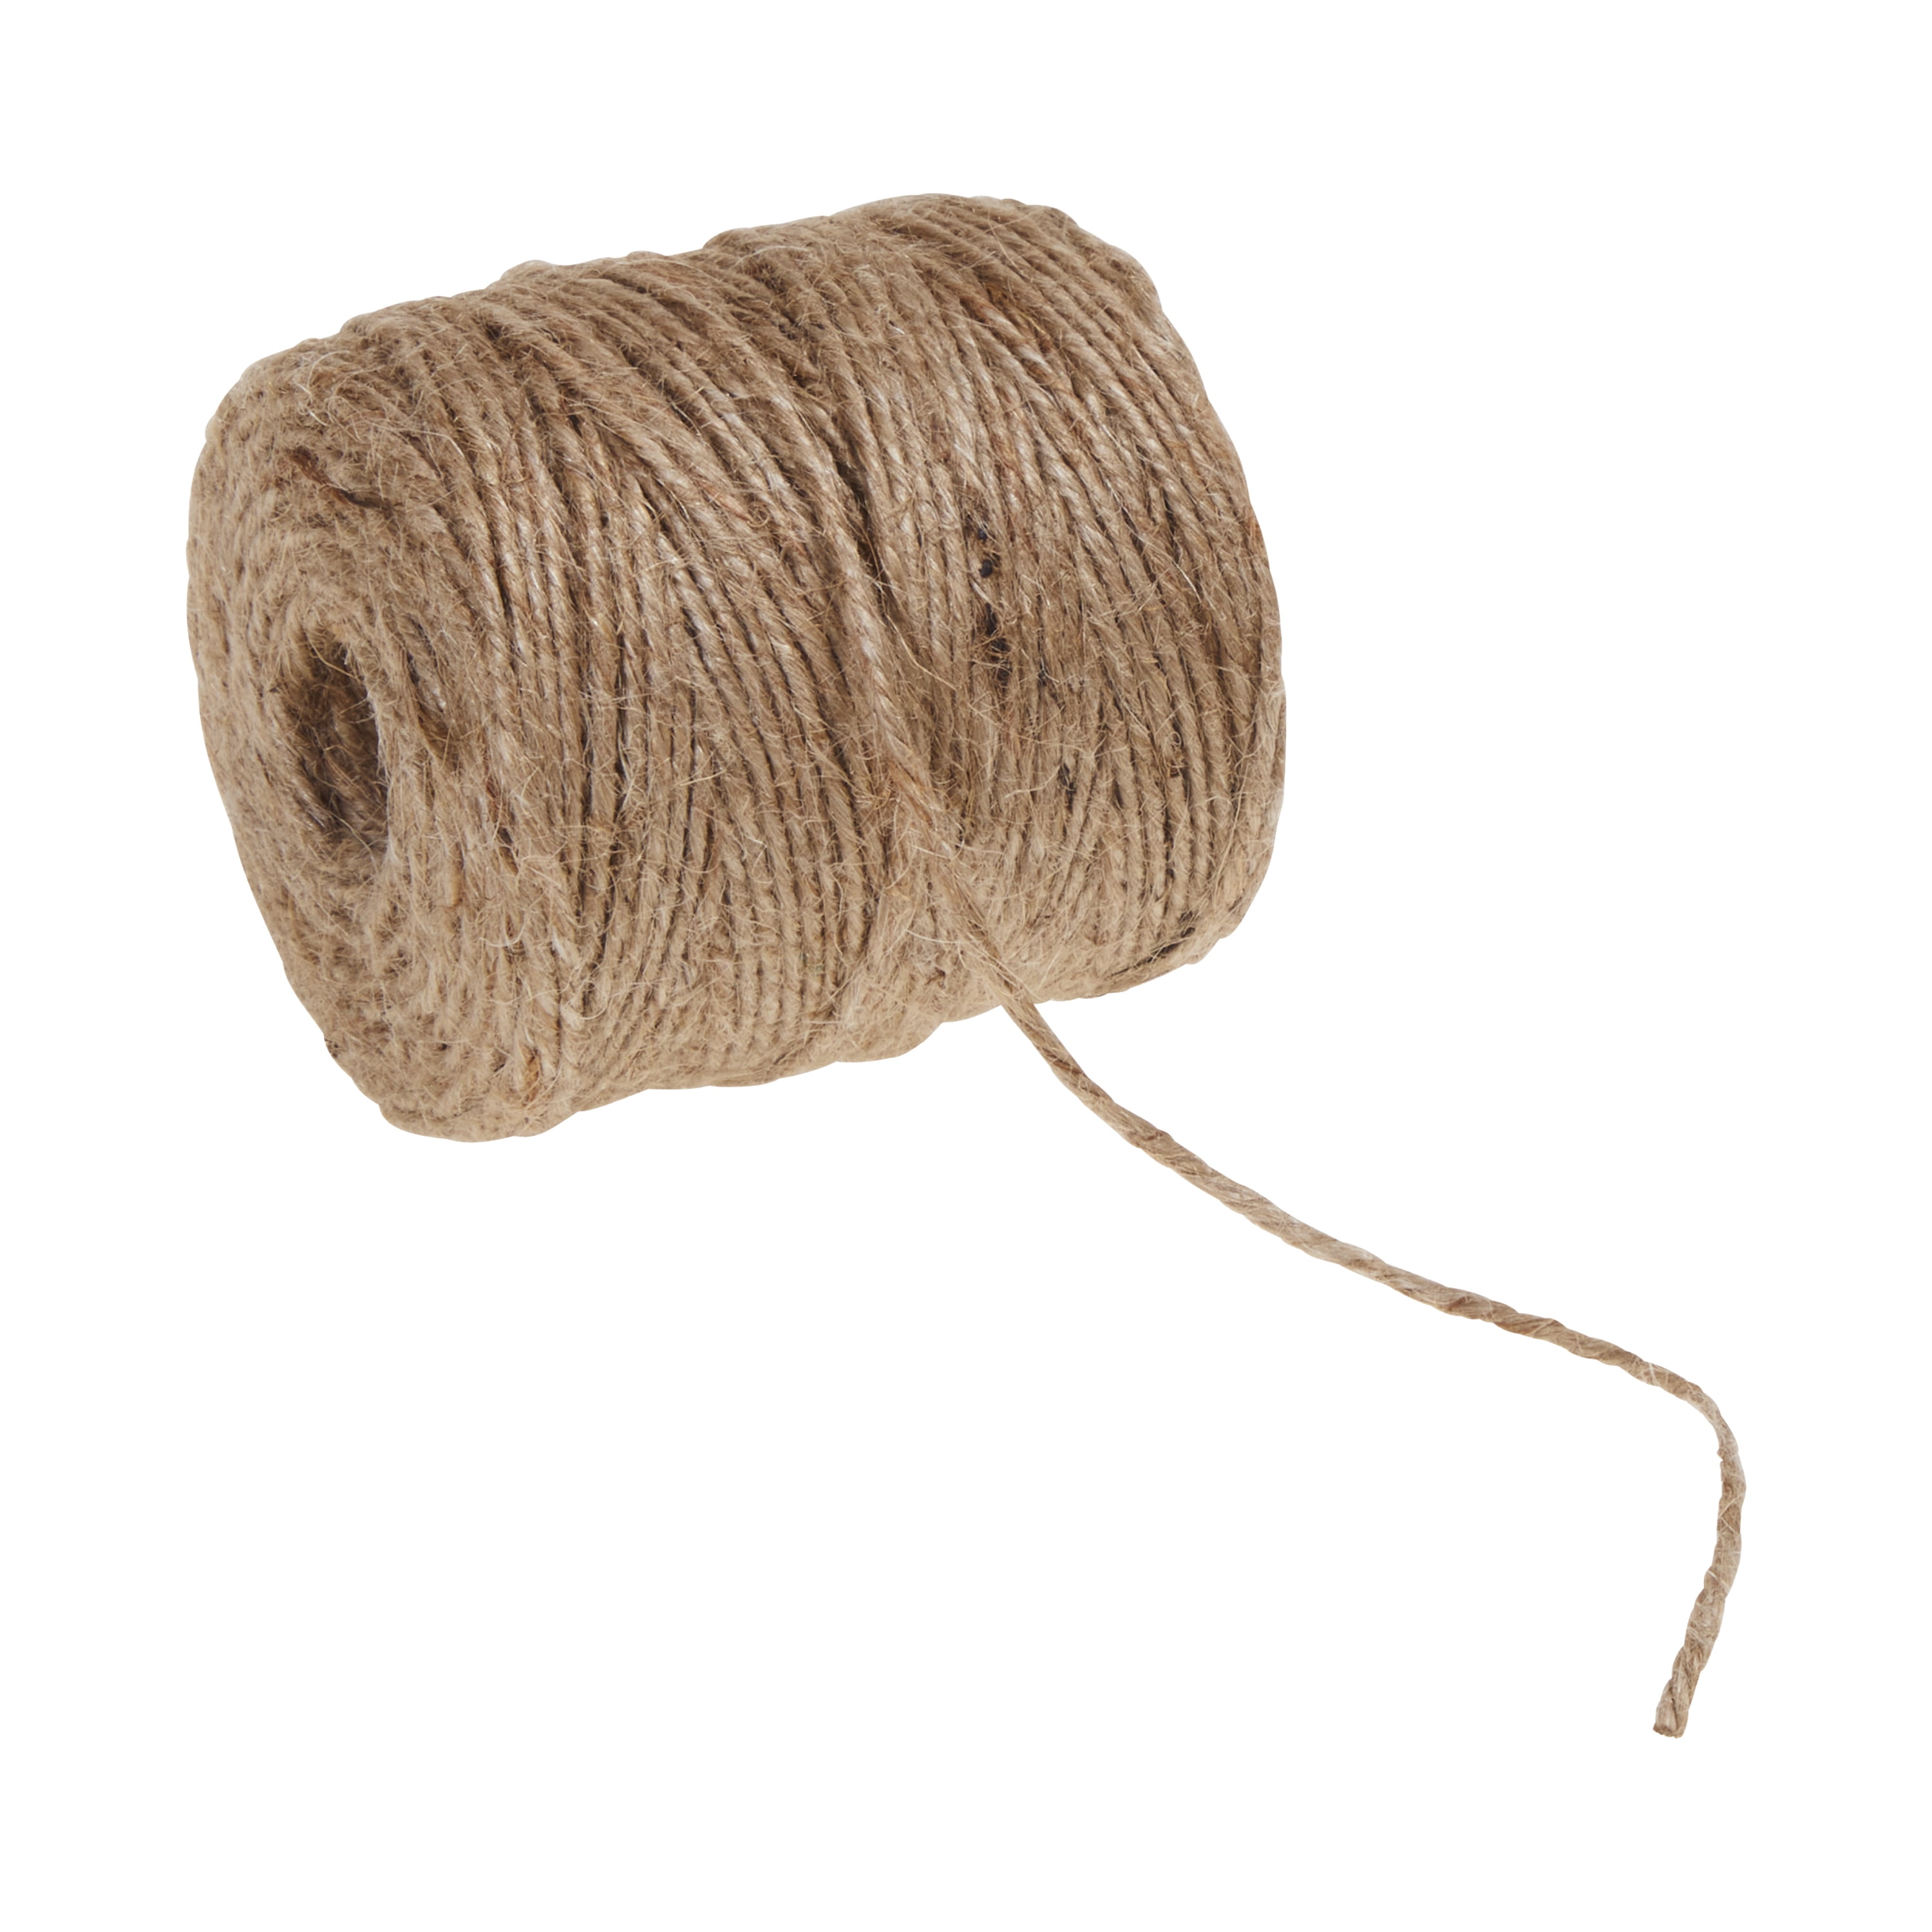 Darice Jute Cord 3 Ply .5LB 100% Natural New Sealed Crafts Macrame & 6 ft  Rope